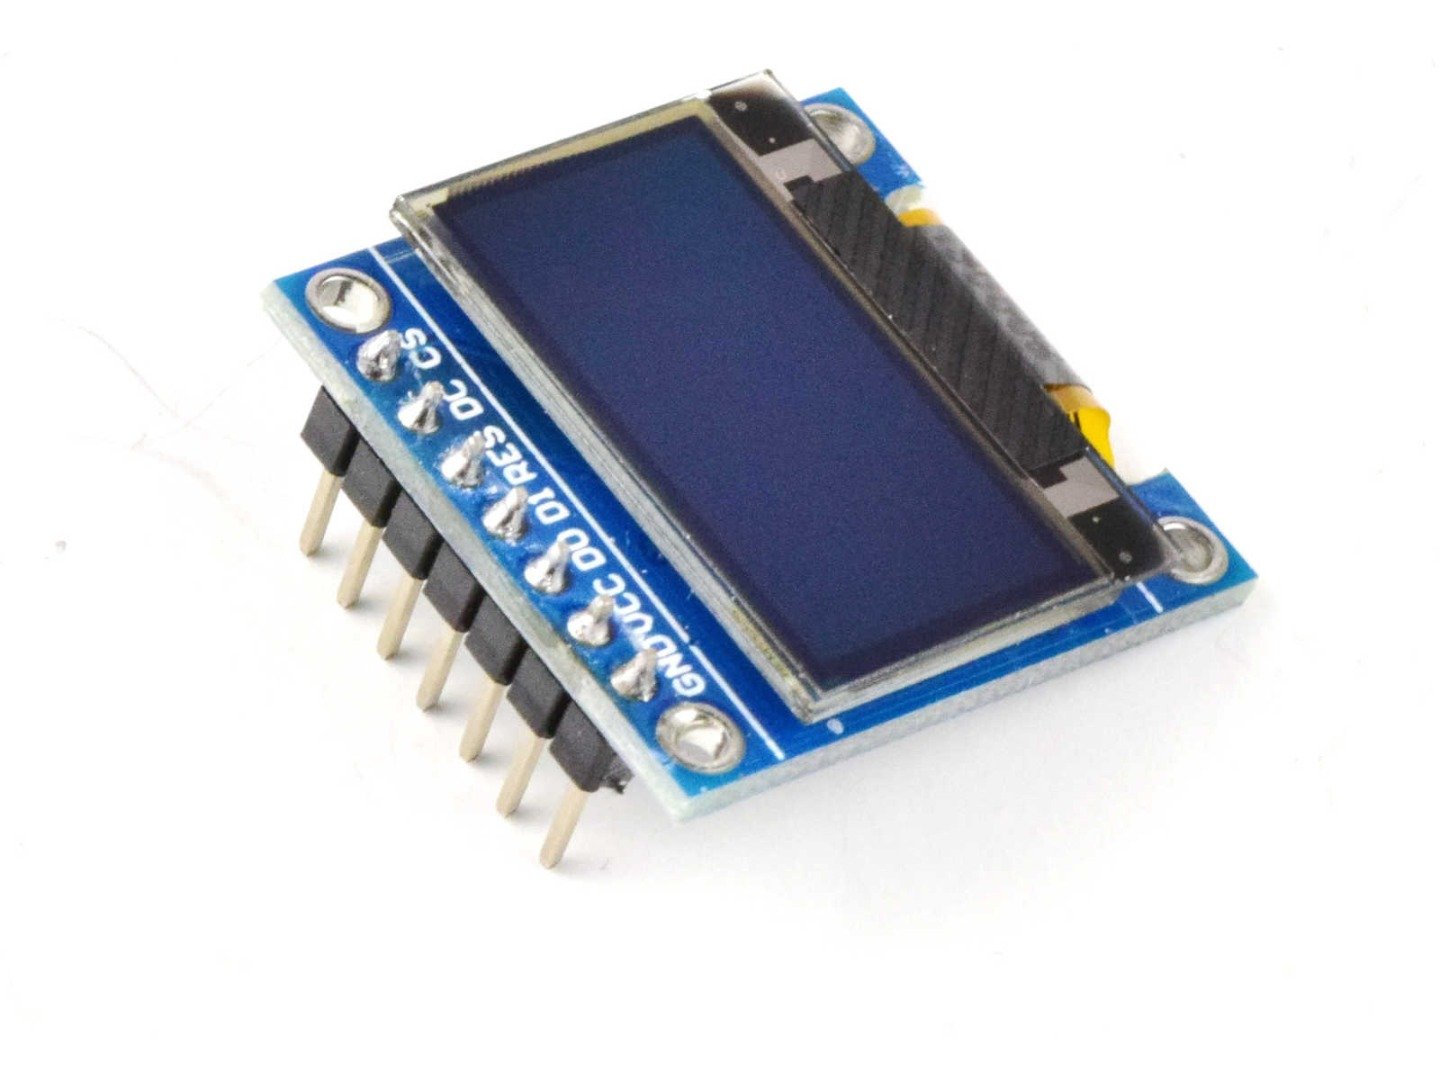 OLED Display 0.96 inch 128×64 with SPI interface – 3-5V (100% compatible with Arduino) 6